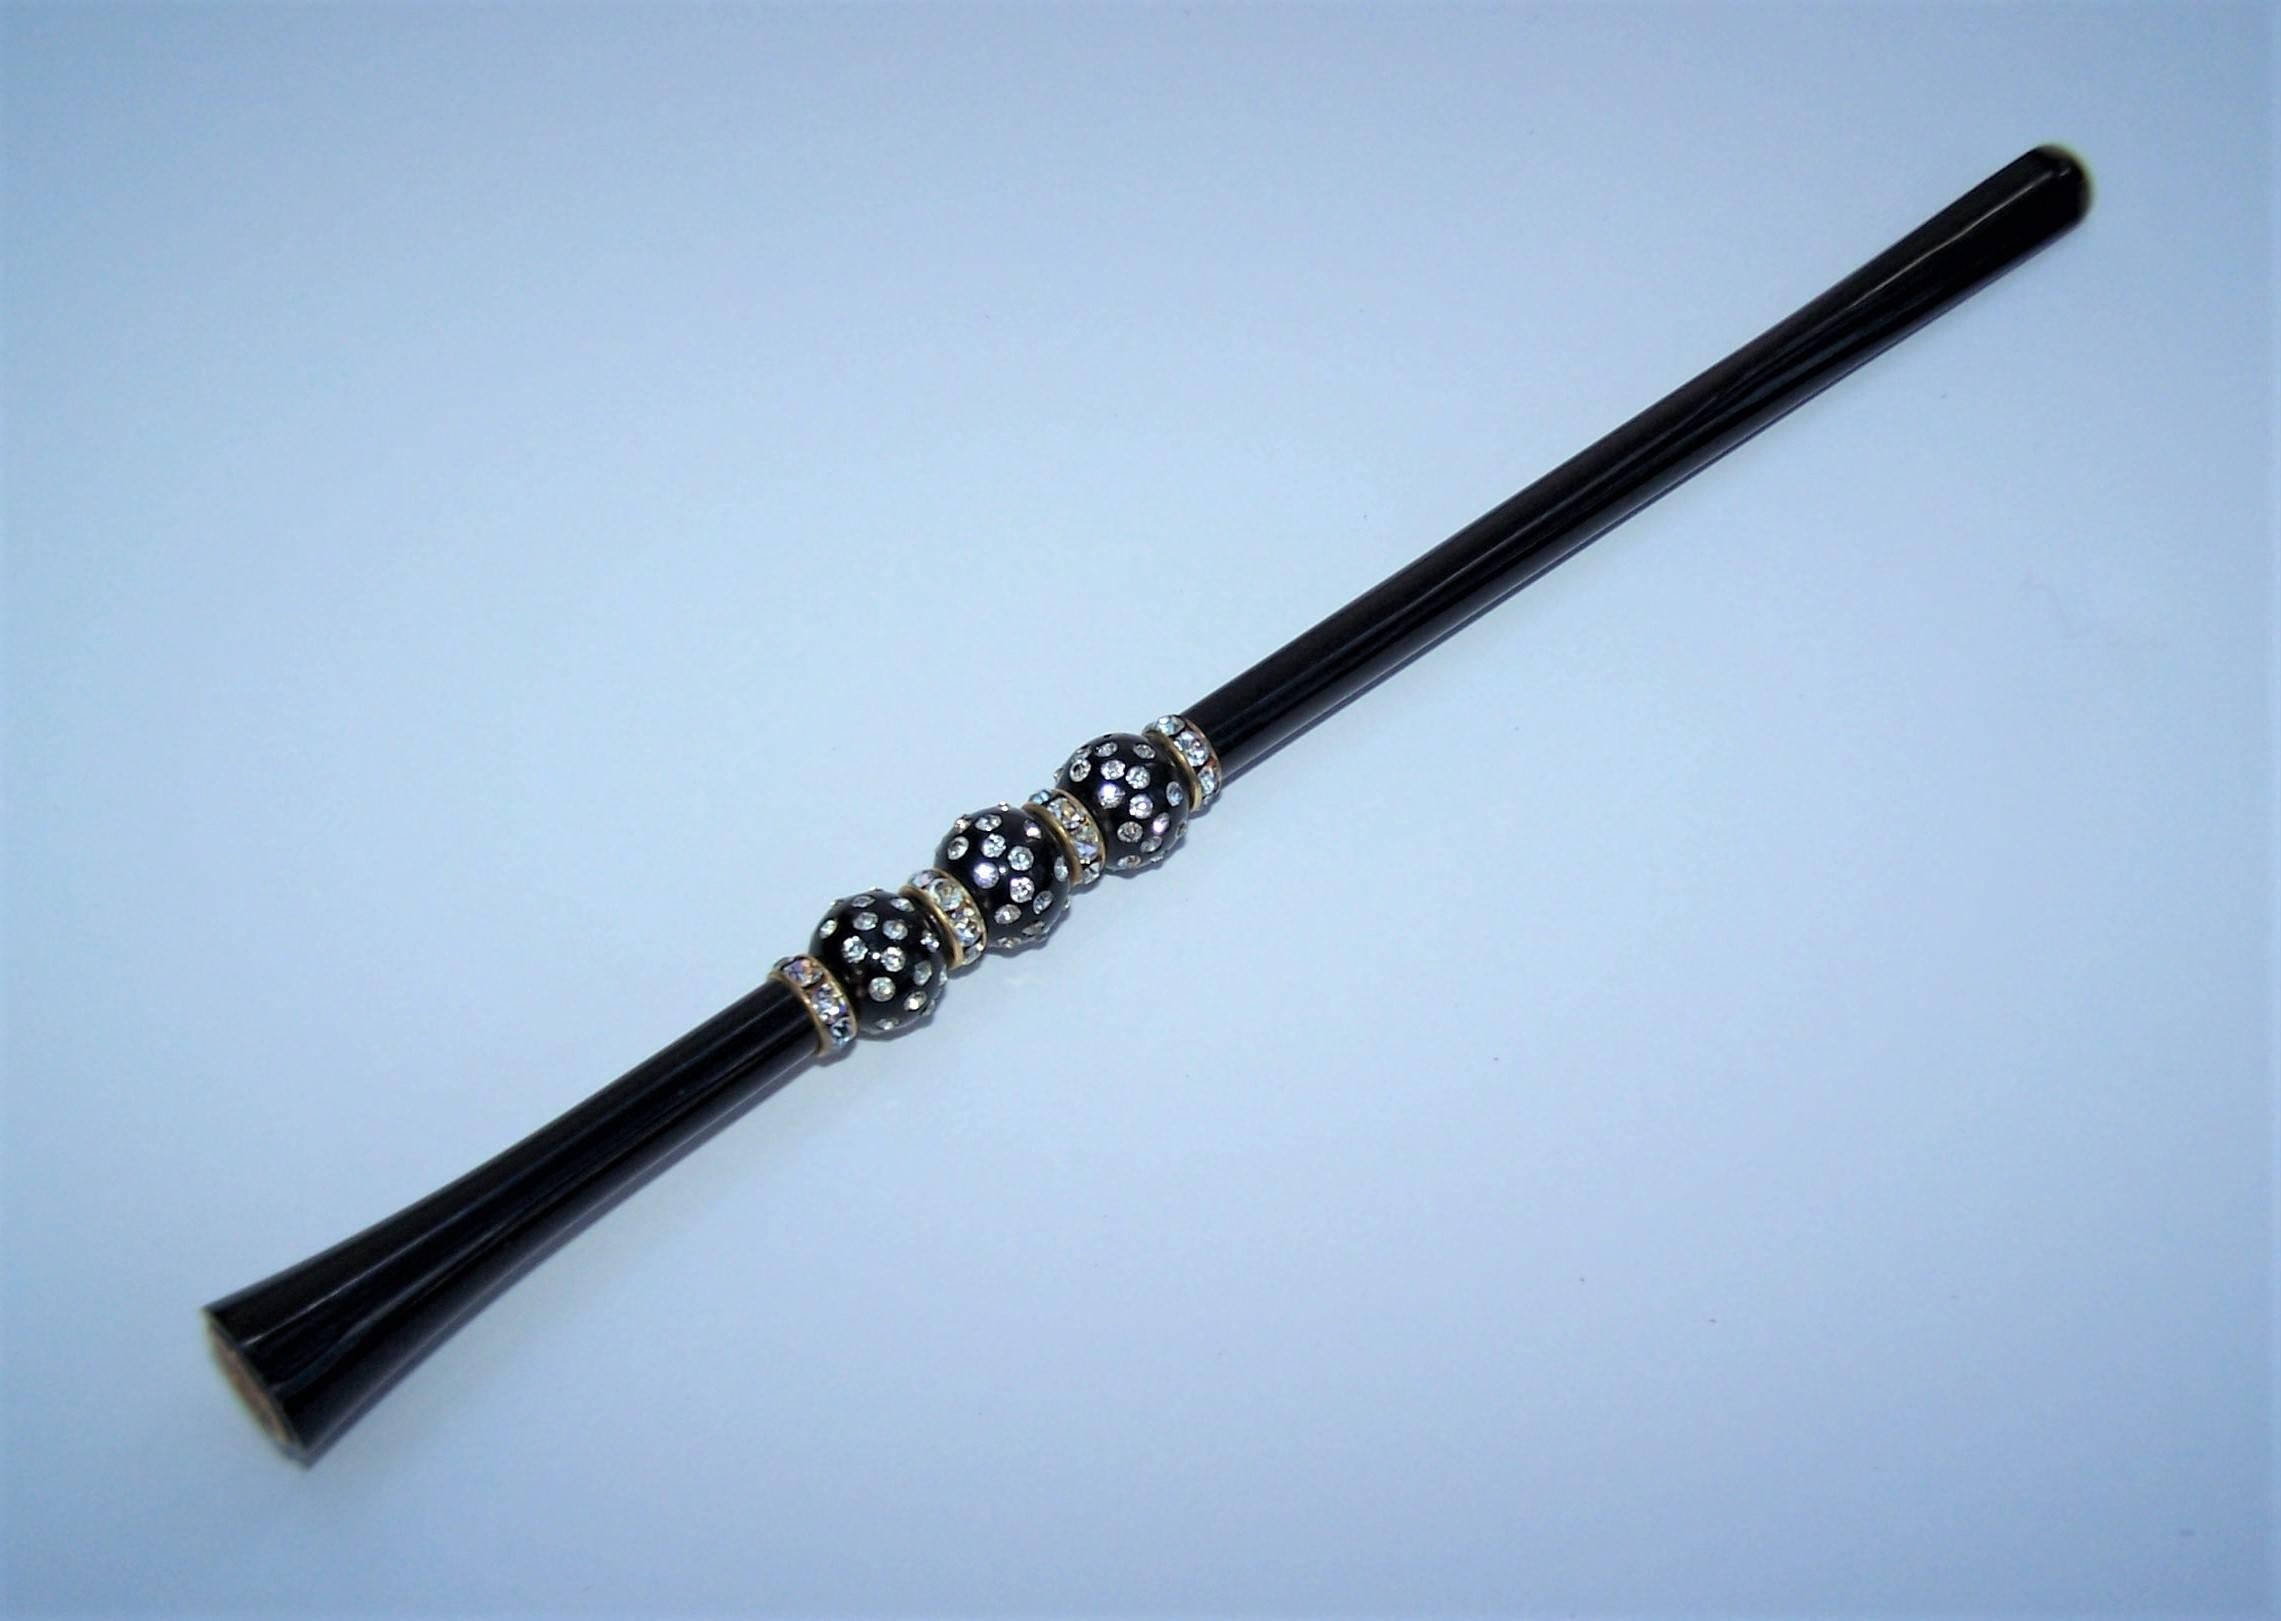 Smoke in vintage style with this 1950's glam cigarette holder reminiscent of 1920's flapper fashions.  The art deco design features a black plastic body measuring 8.88